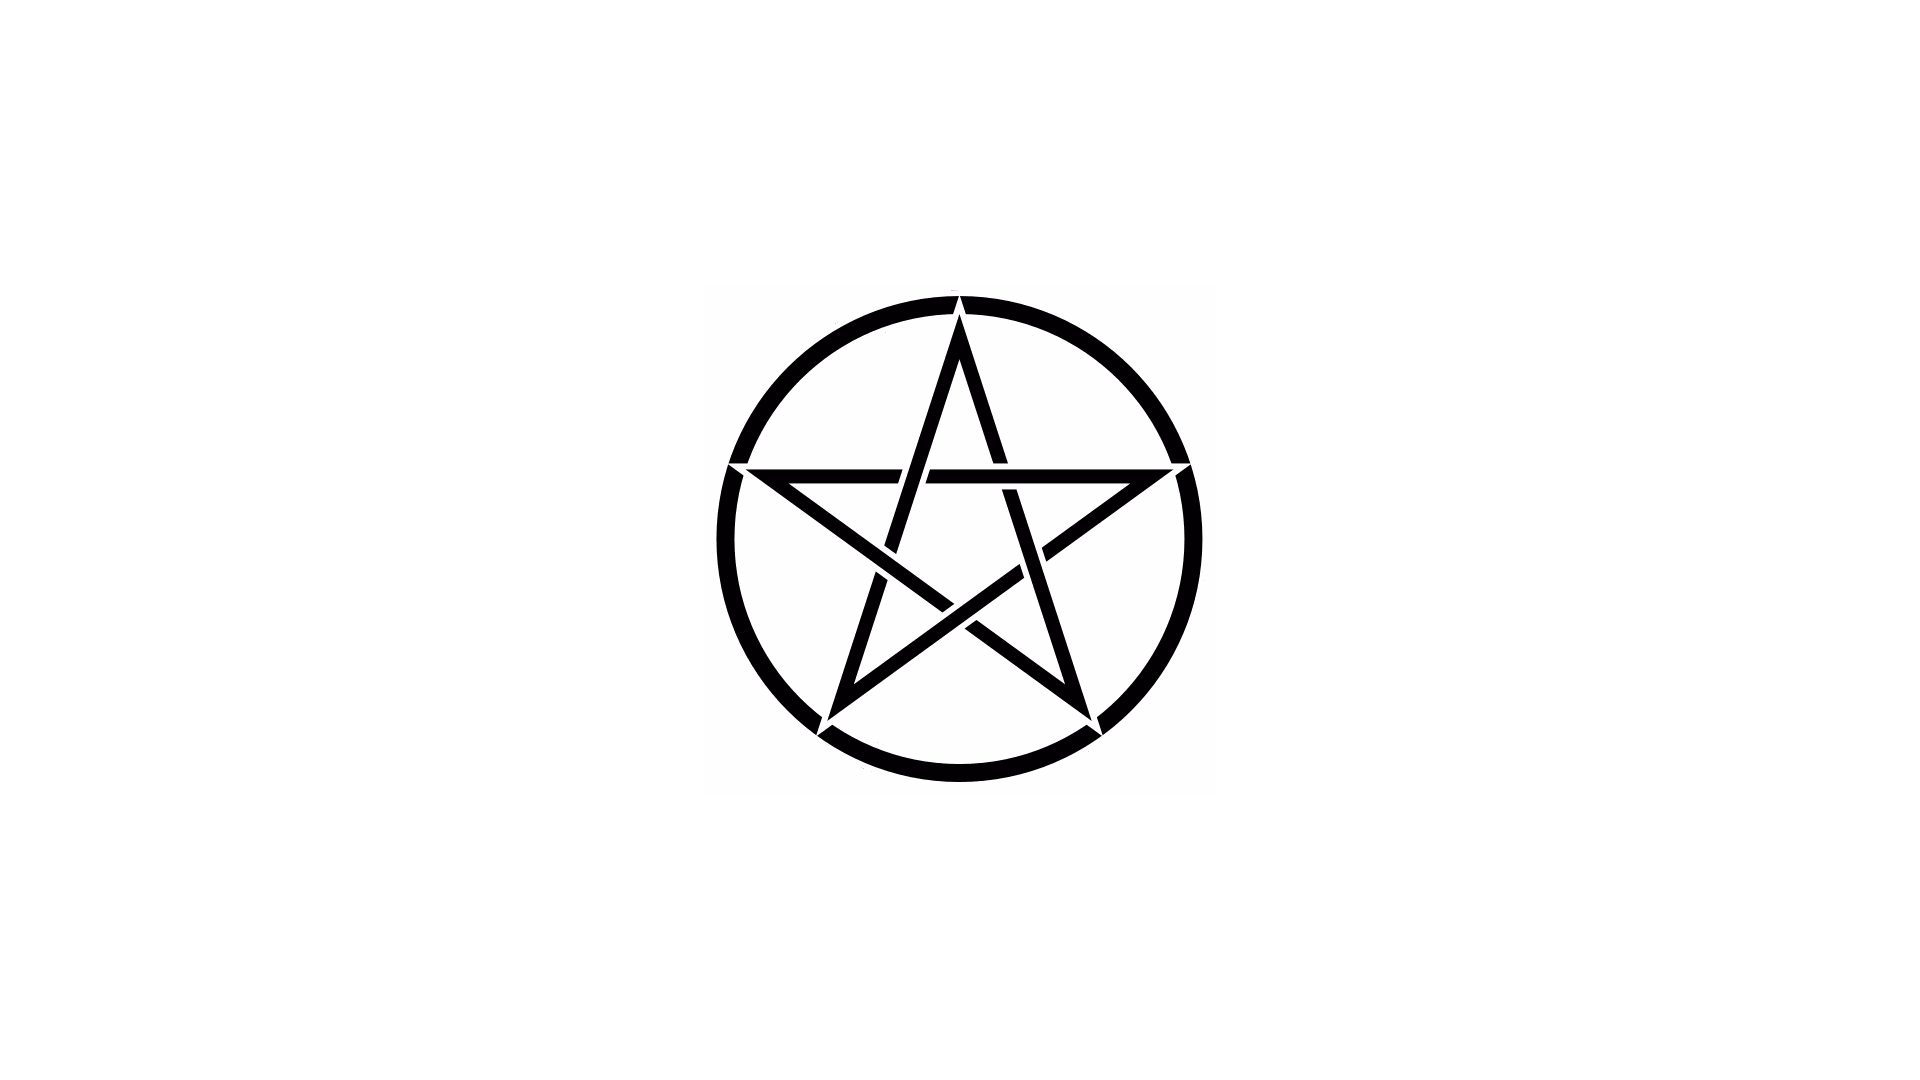 Pentacle Wicca Pagan Witchcraft Satanic 1920x1080